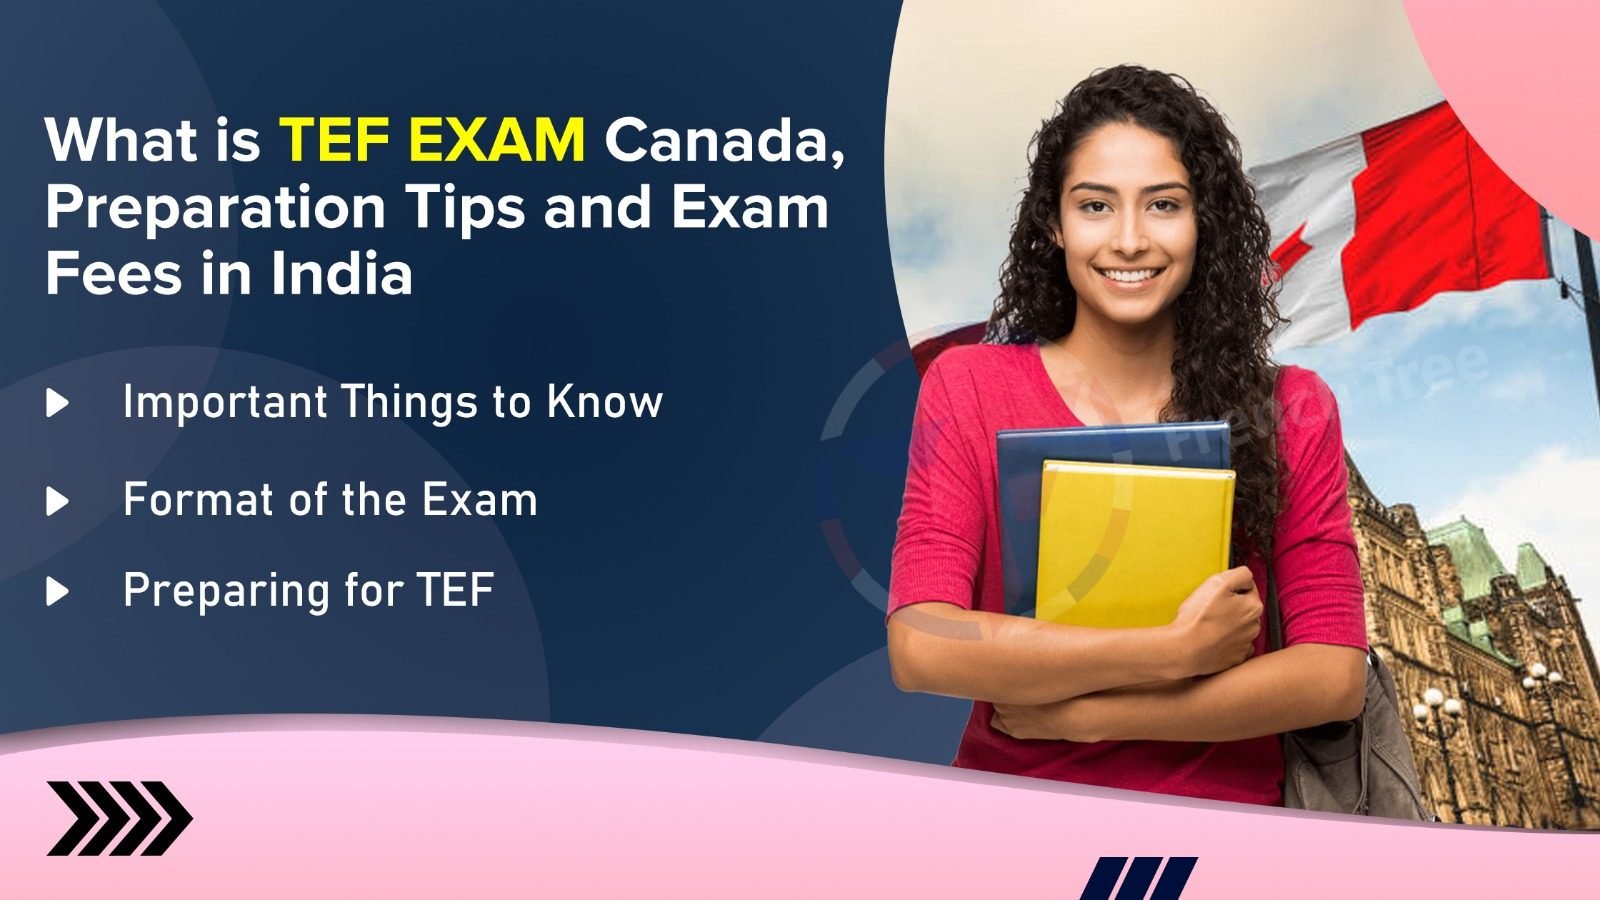 What is TEF Exam Canada Preparation Tips and Exam Fees in India